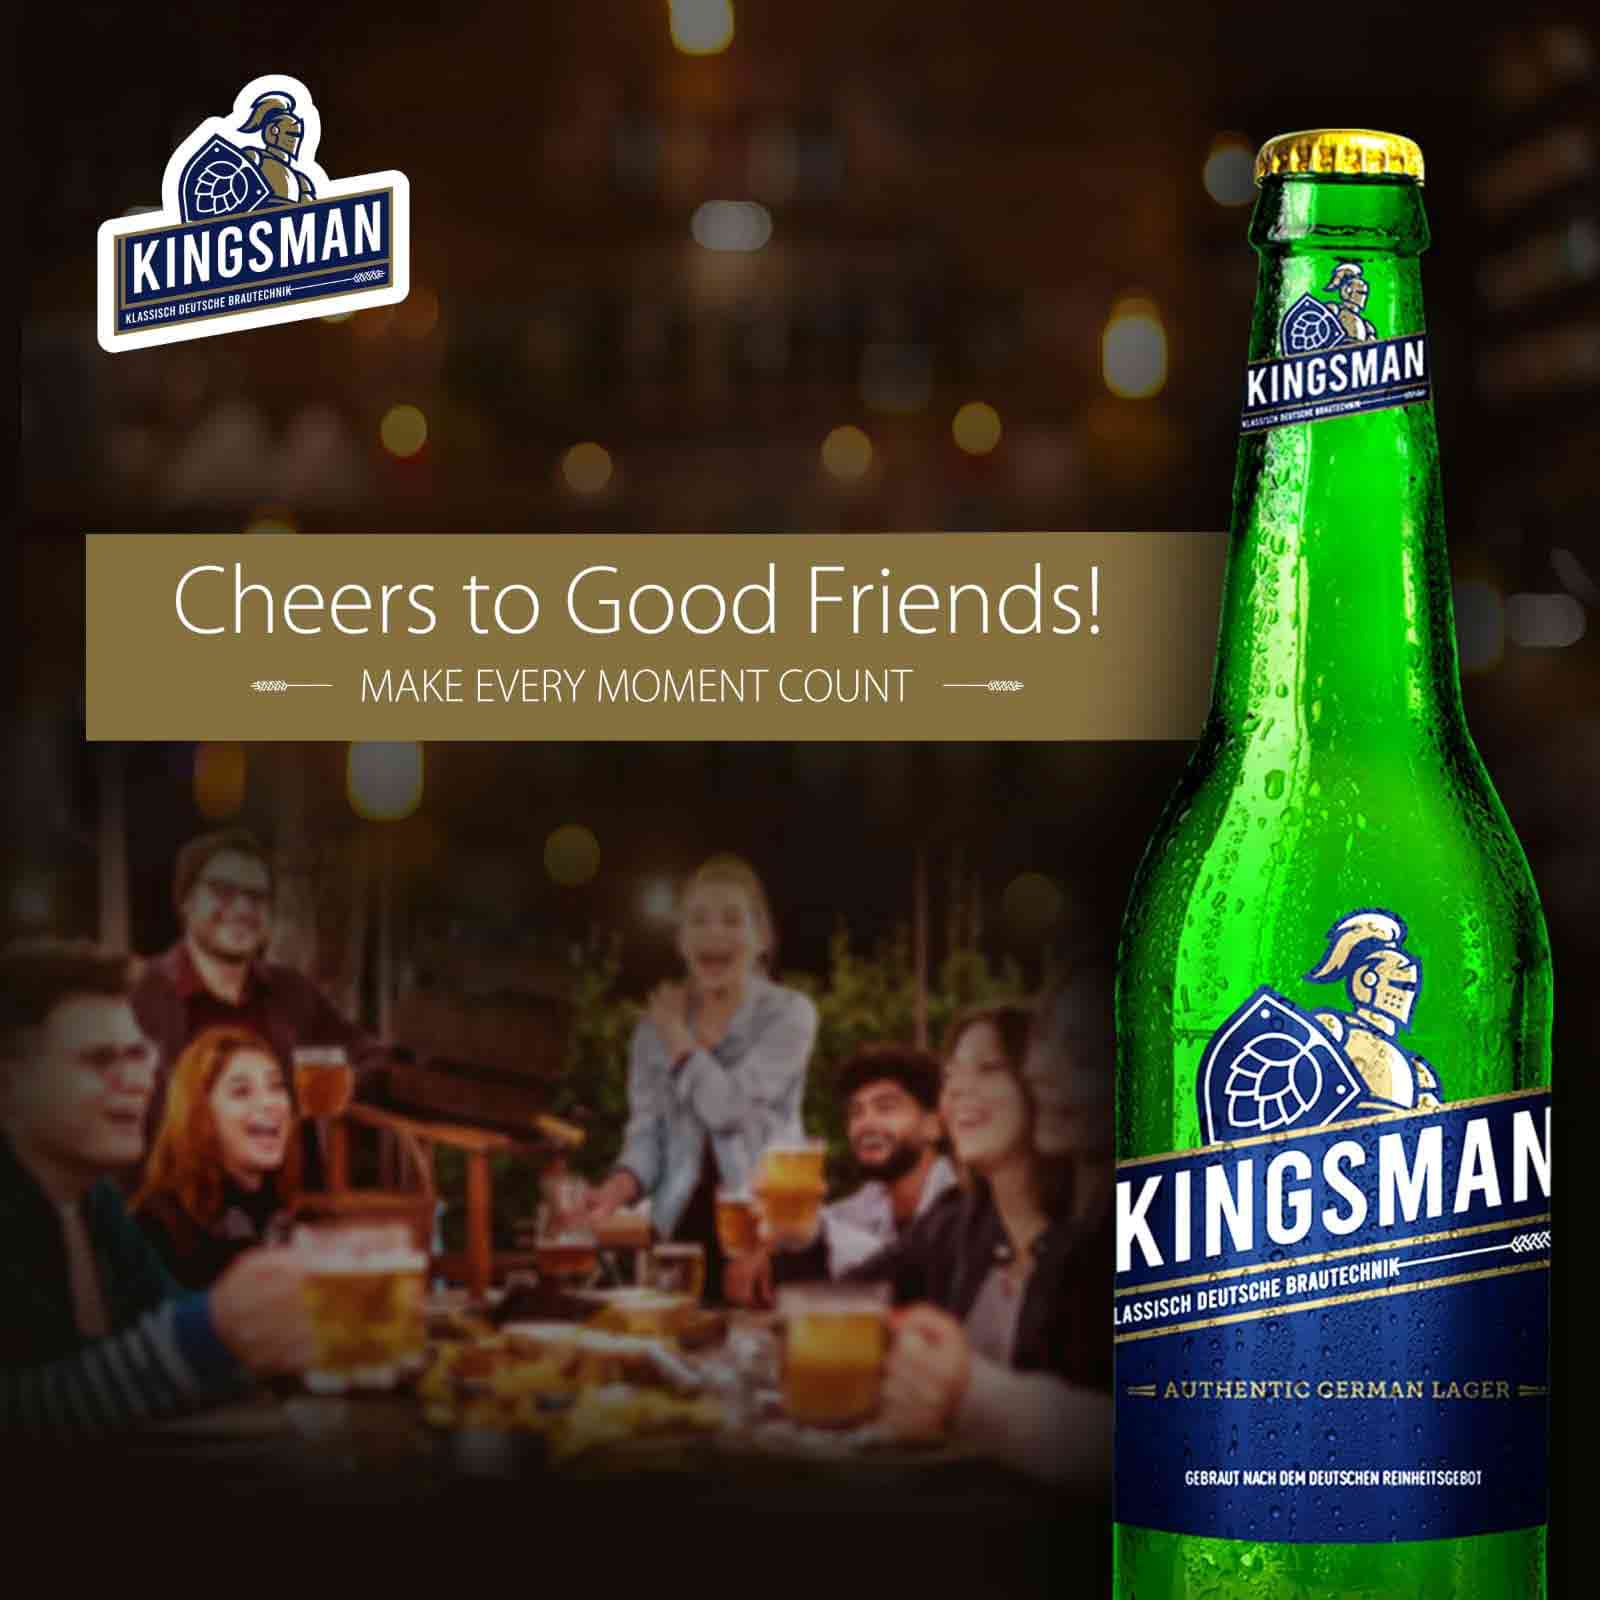 Cheers to good friends with Kingsman beer